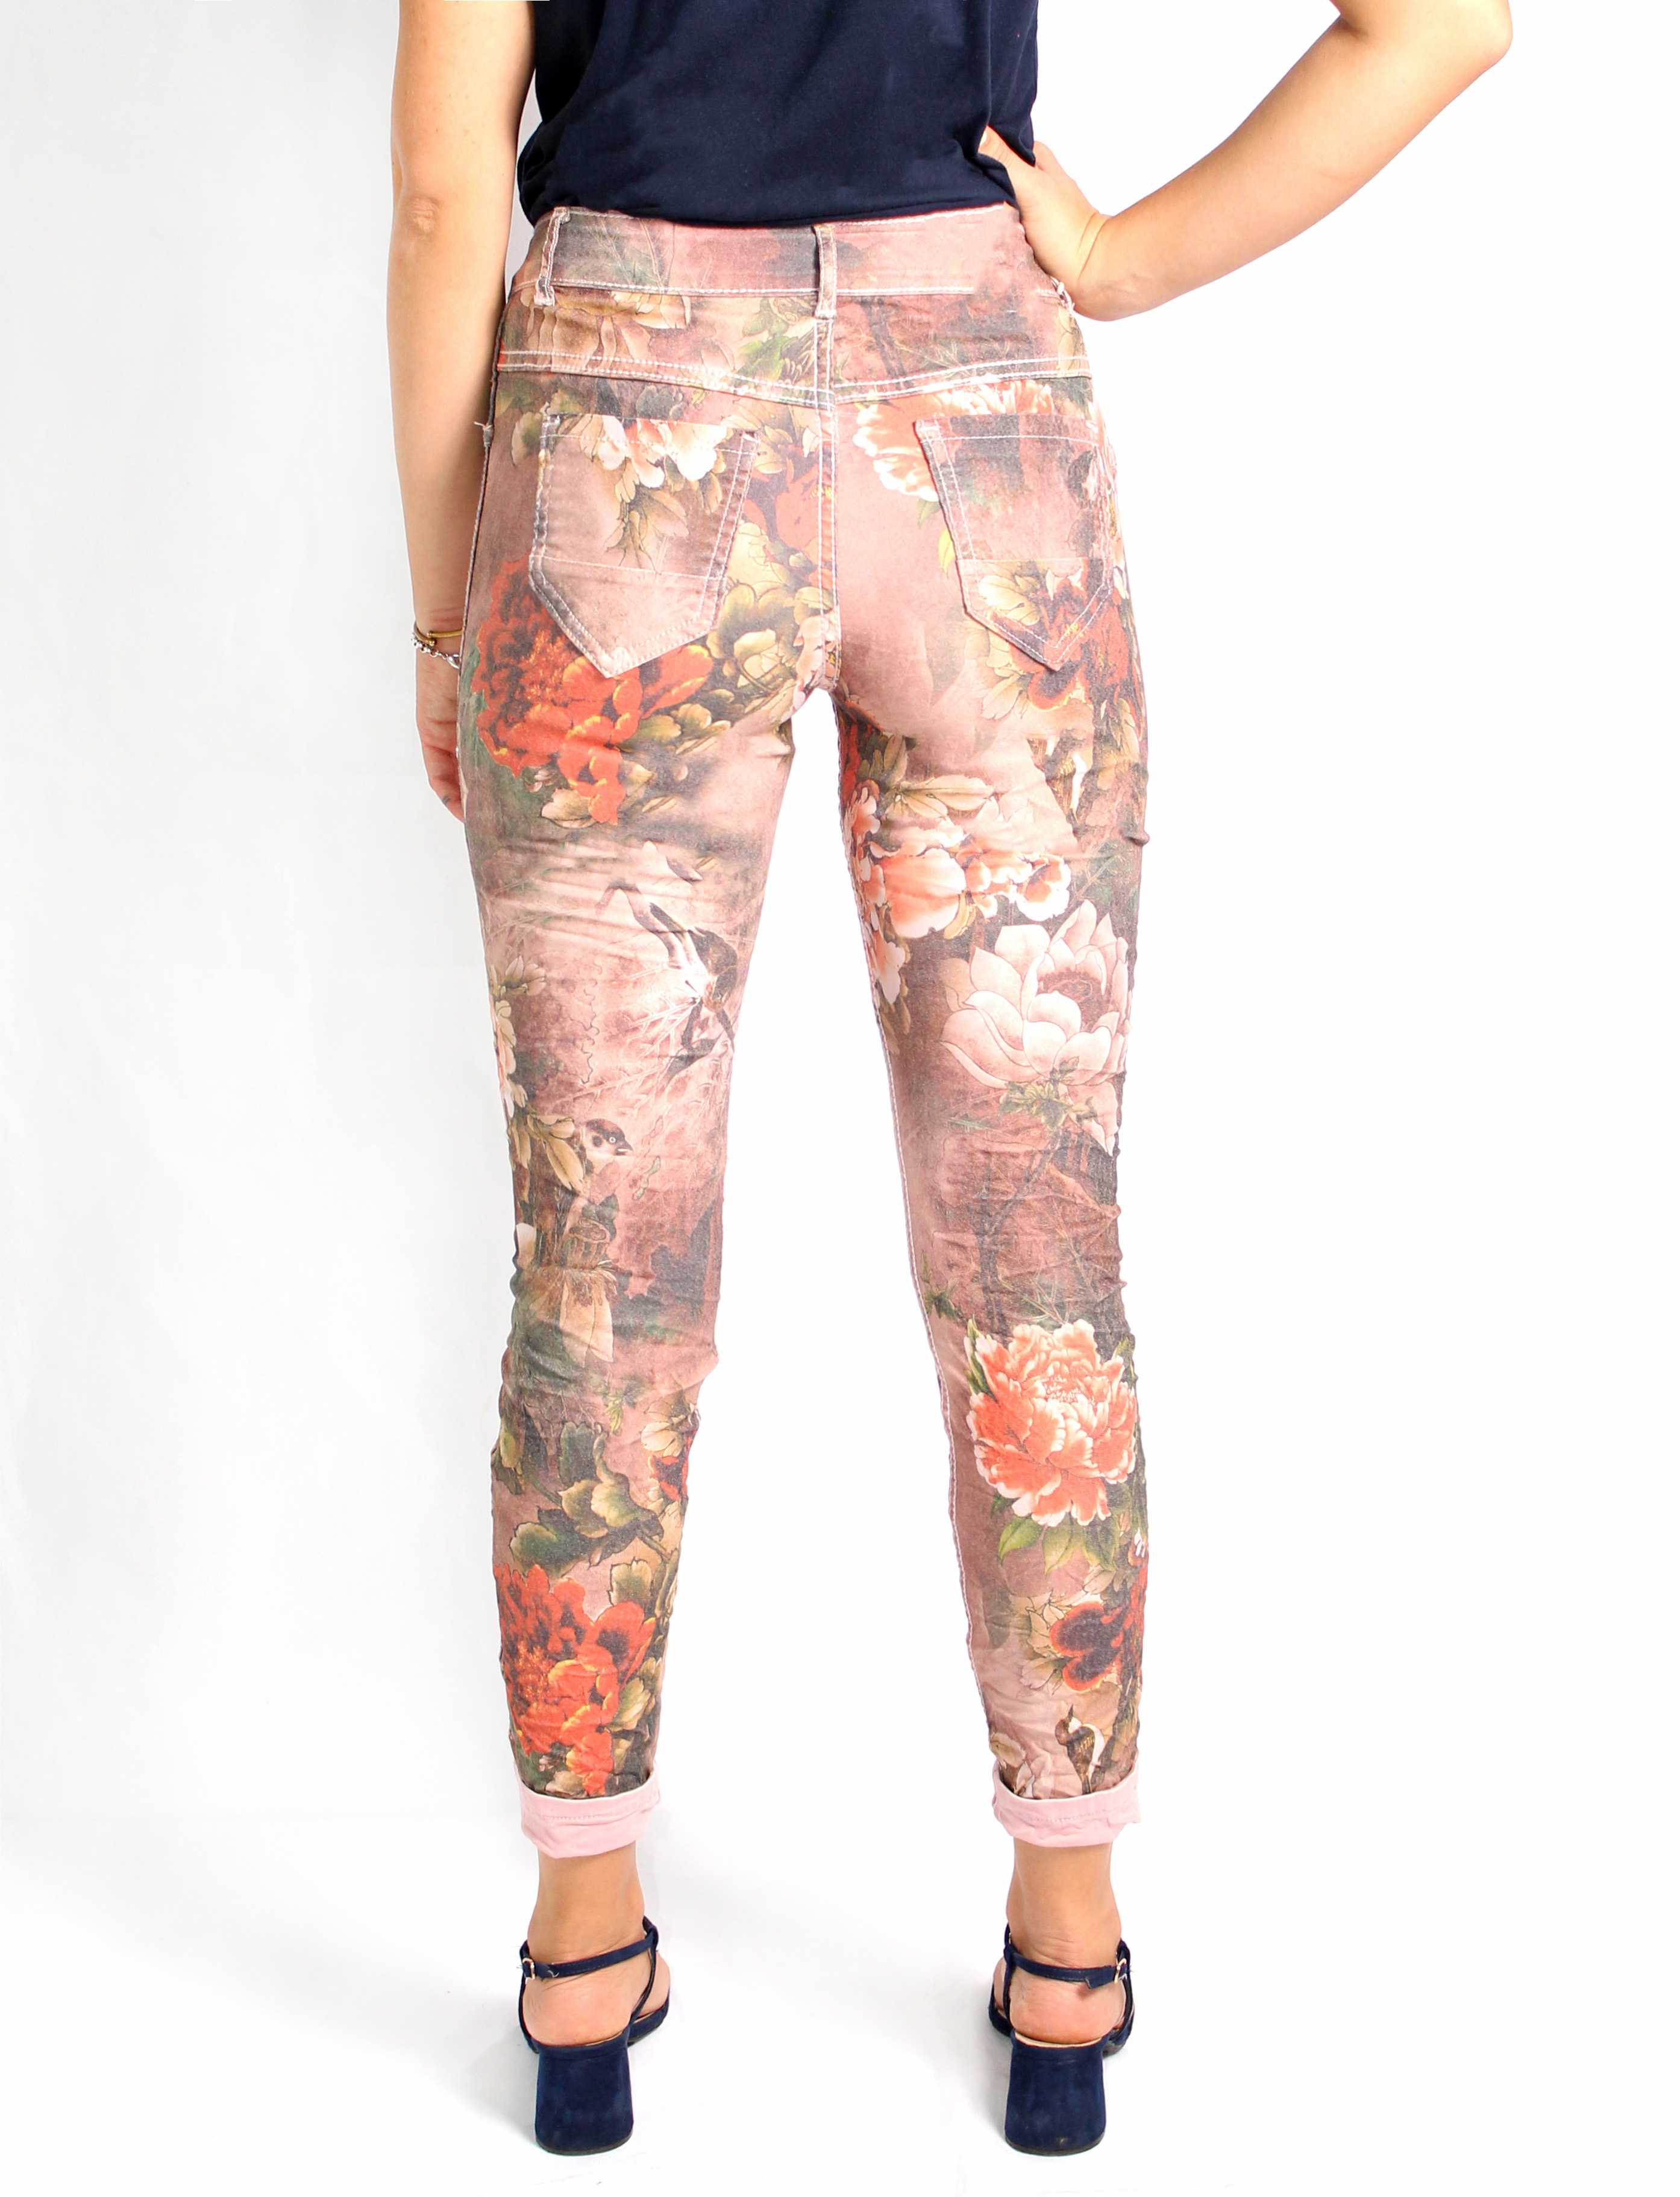 MADE IN ITALY PINK FLORAL REVERSIBLE JEANS | Rosella - Style inspired ...